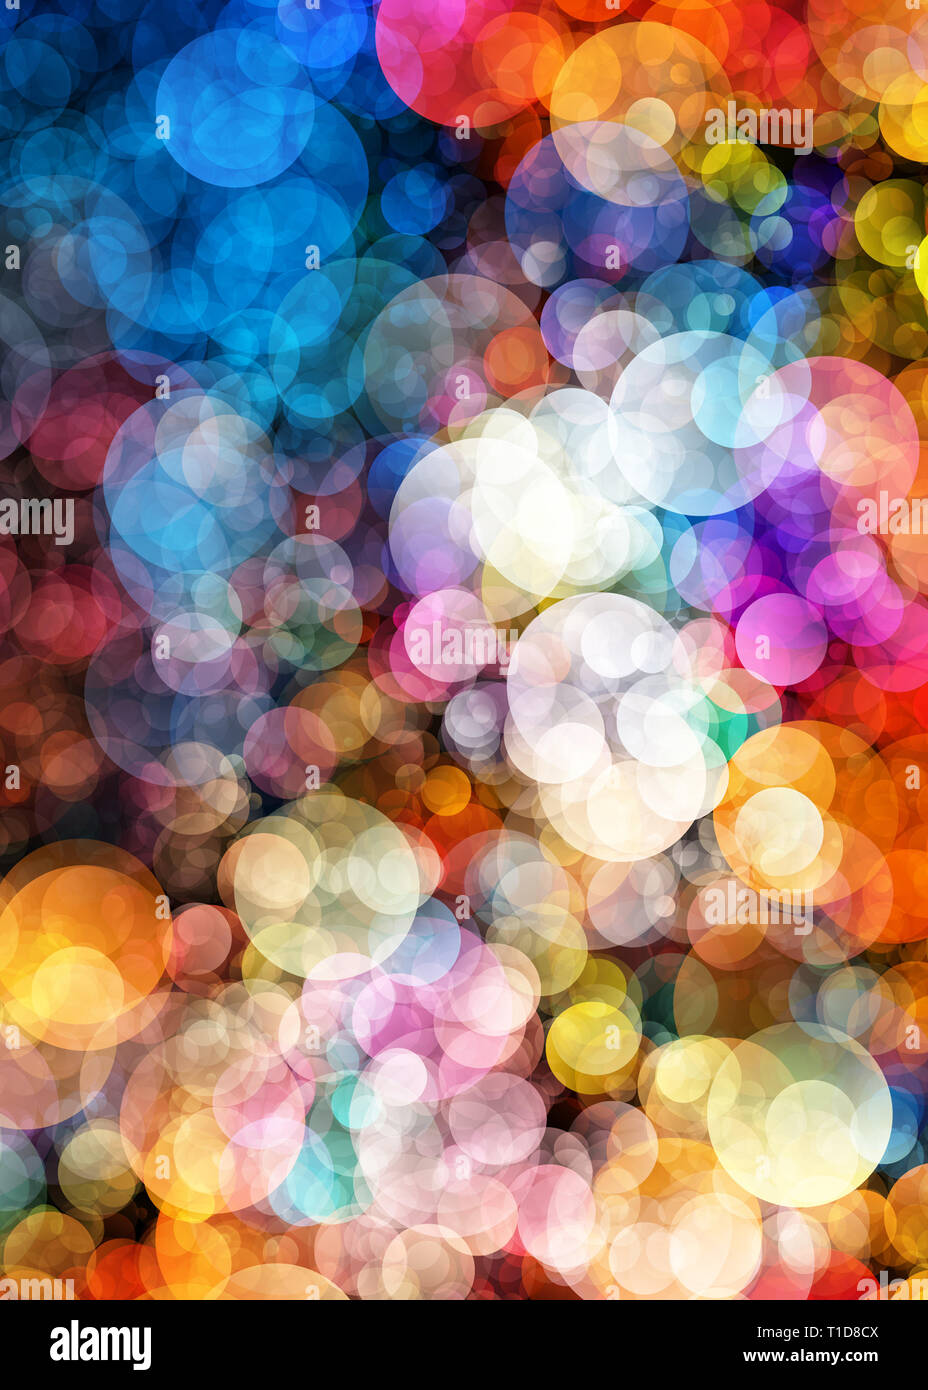 abstract colorful background of round circles Stock Photo